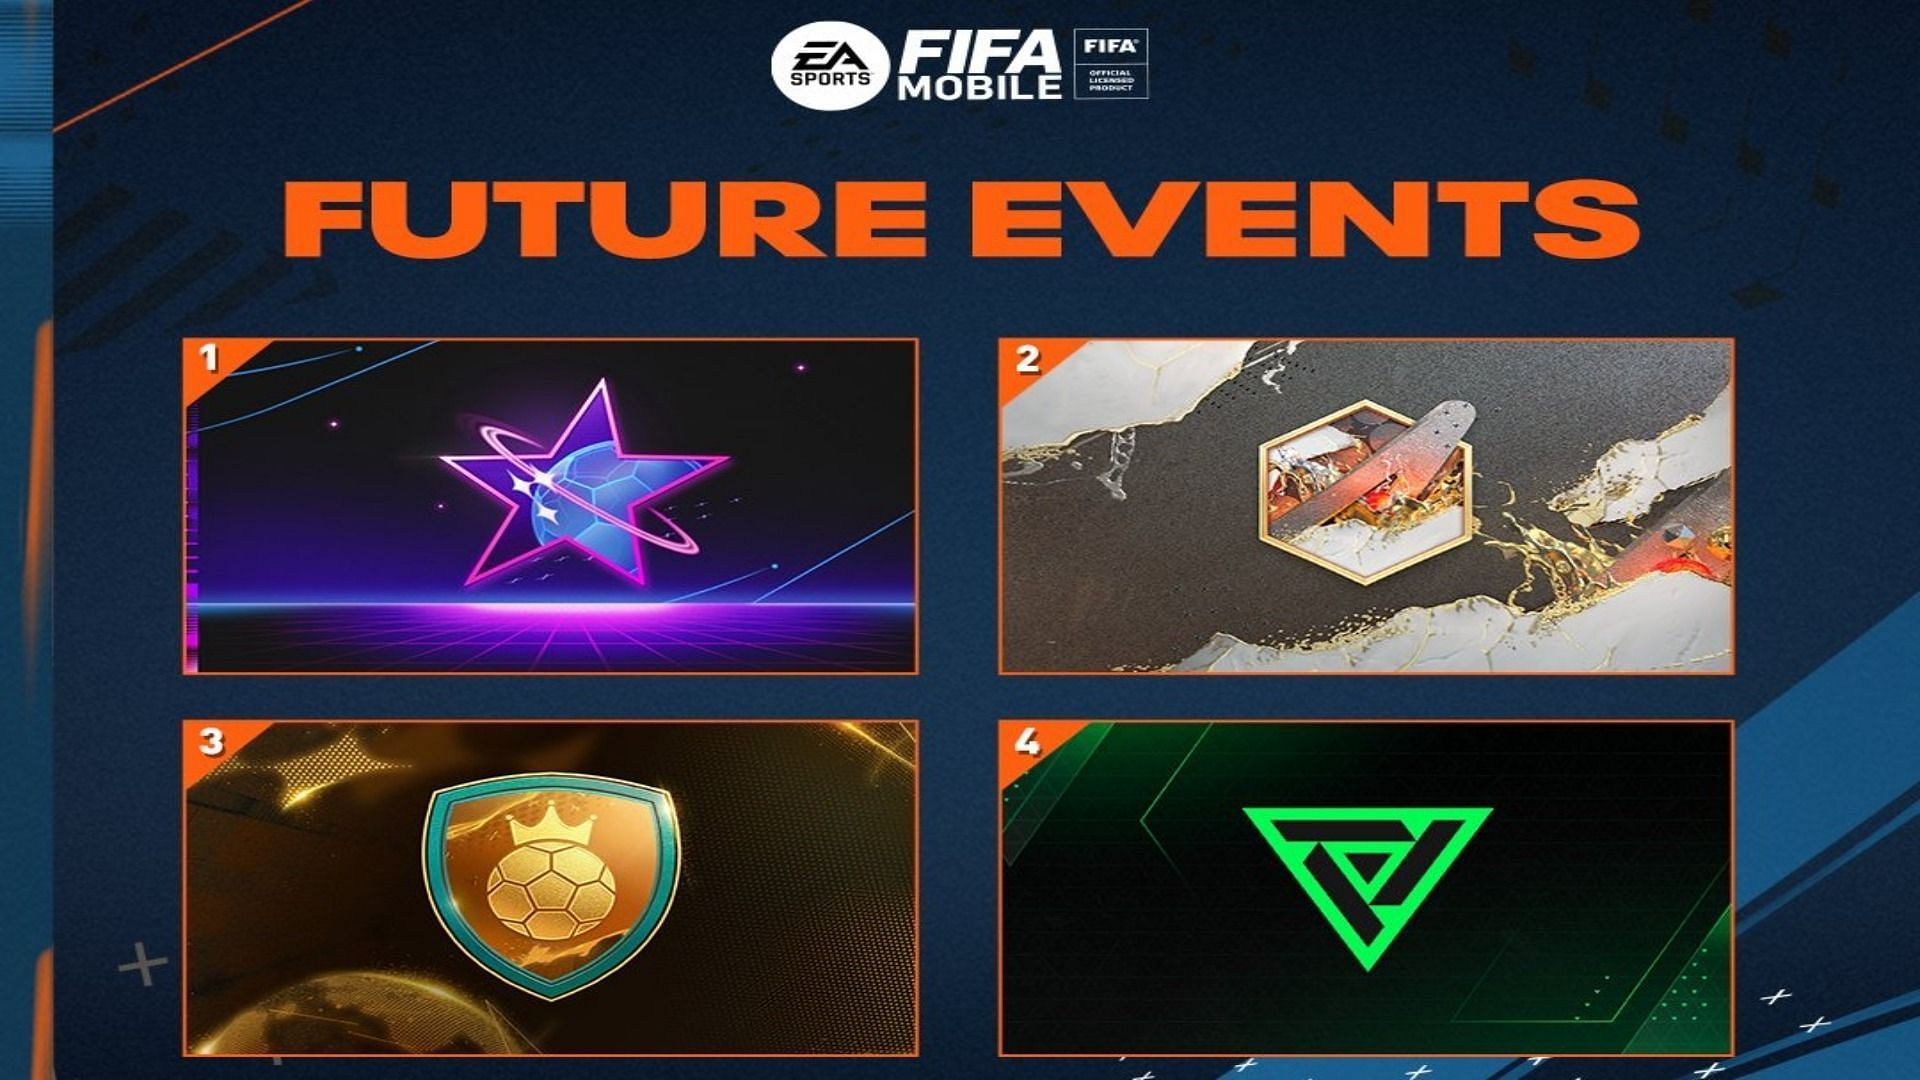 FIFA Mobile - New Season: Gameplay Preview - EA SPORTS Official Site